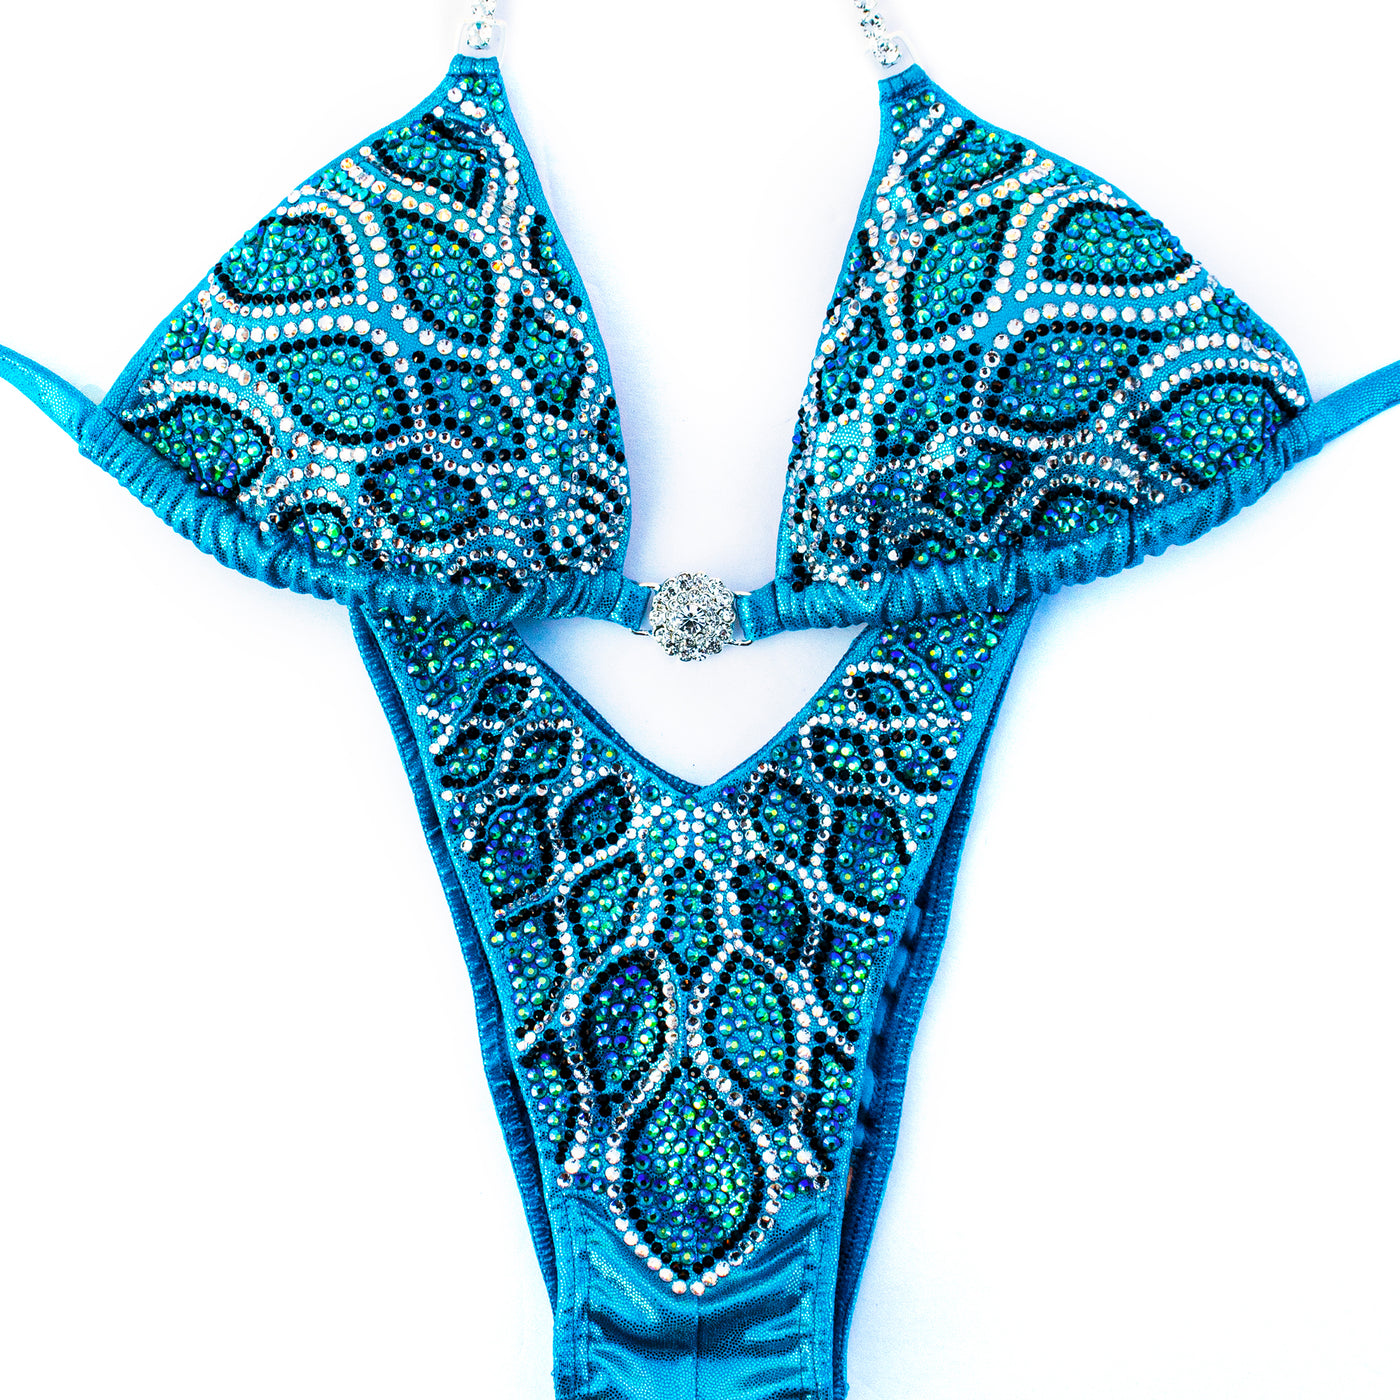 Ivy Figure/WPD Competition Suit | OMG Bikinis